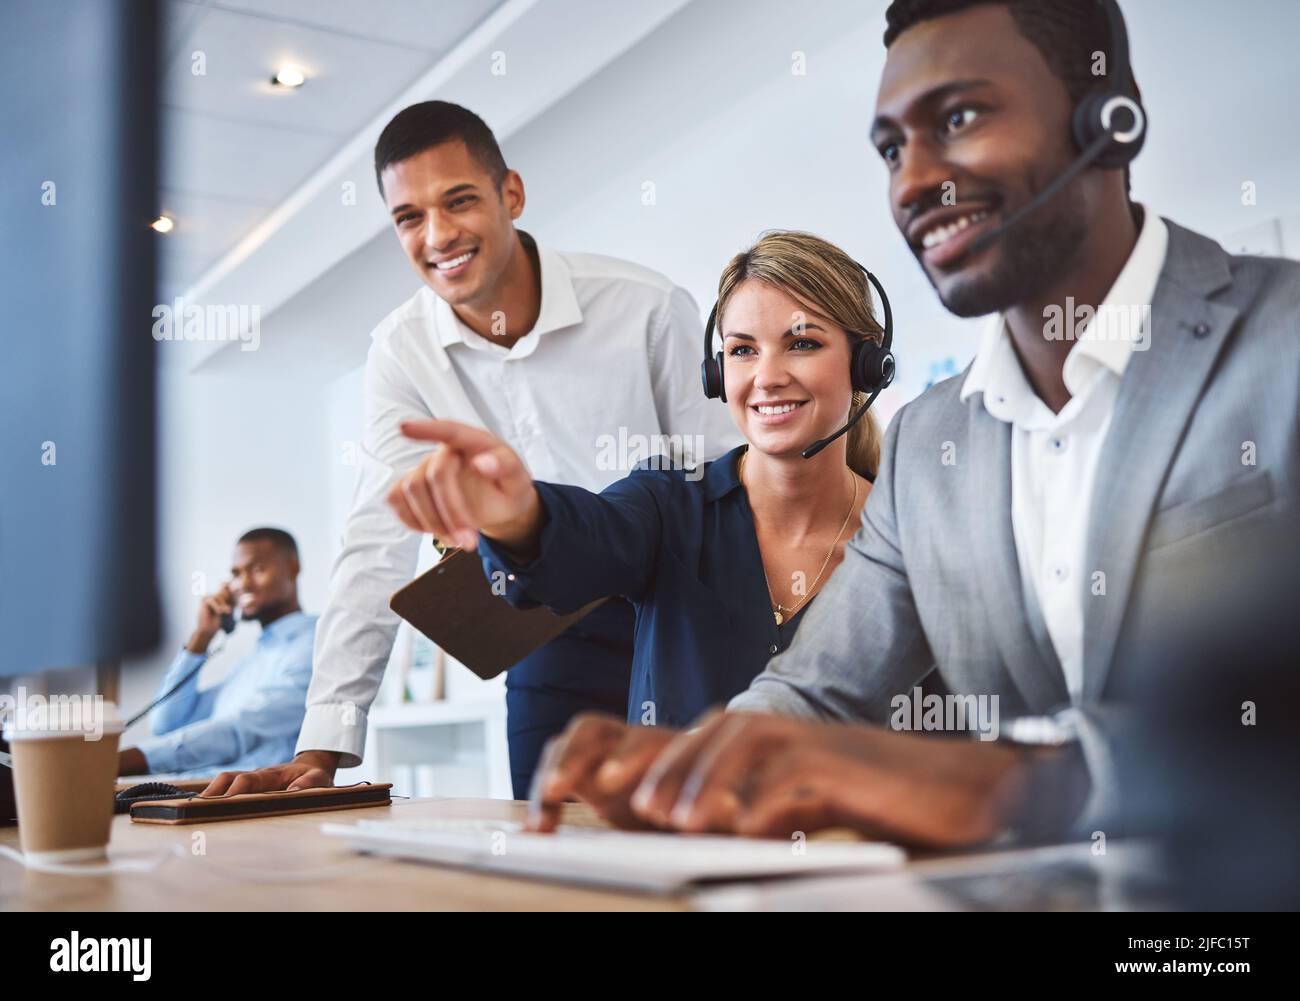 Happy caucasian female call centre telemarketing agent discussing plans with diverse colleagues while working together on computer in an office Stock Photo